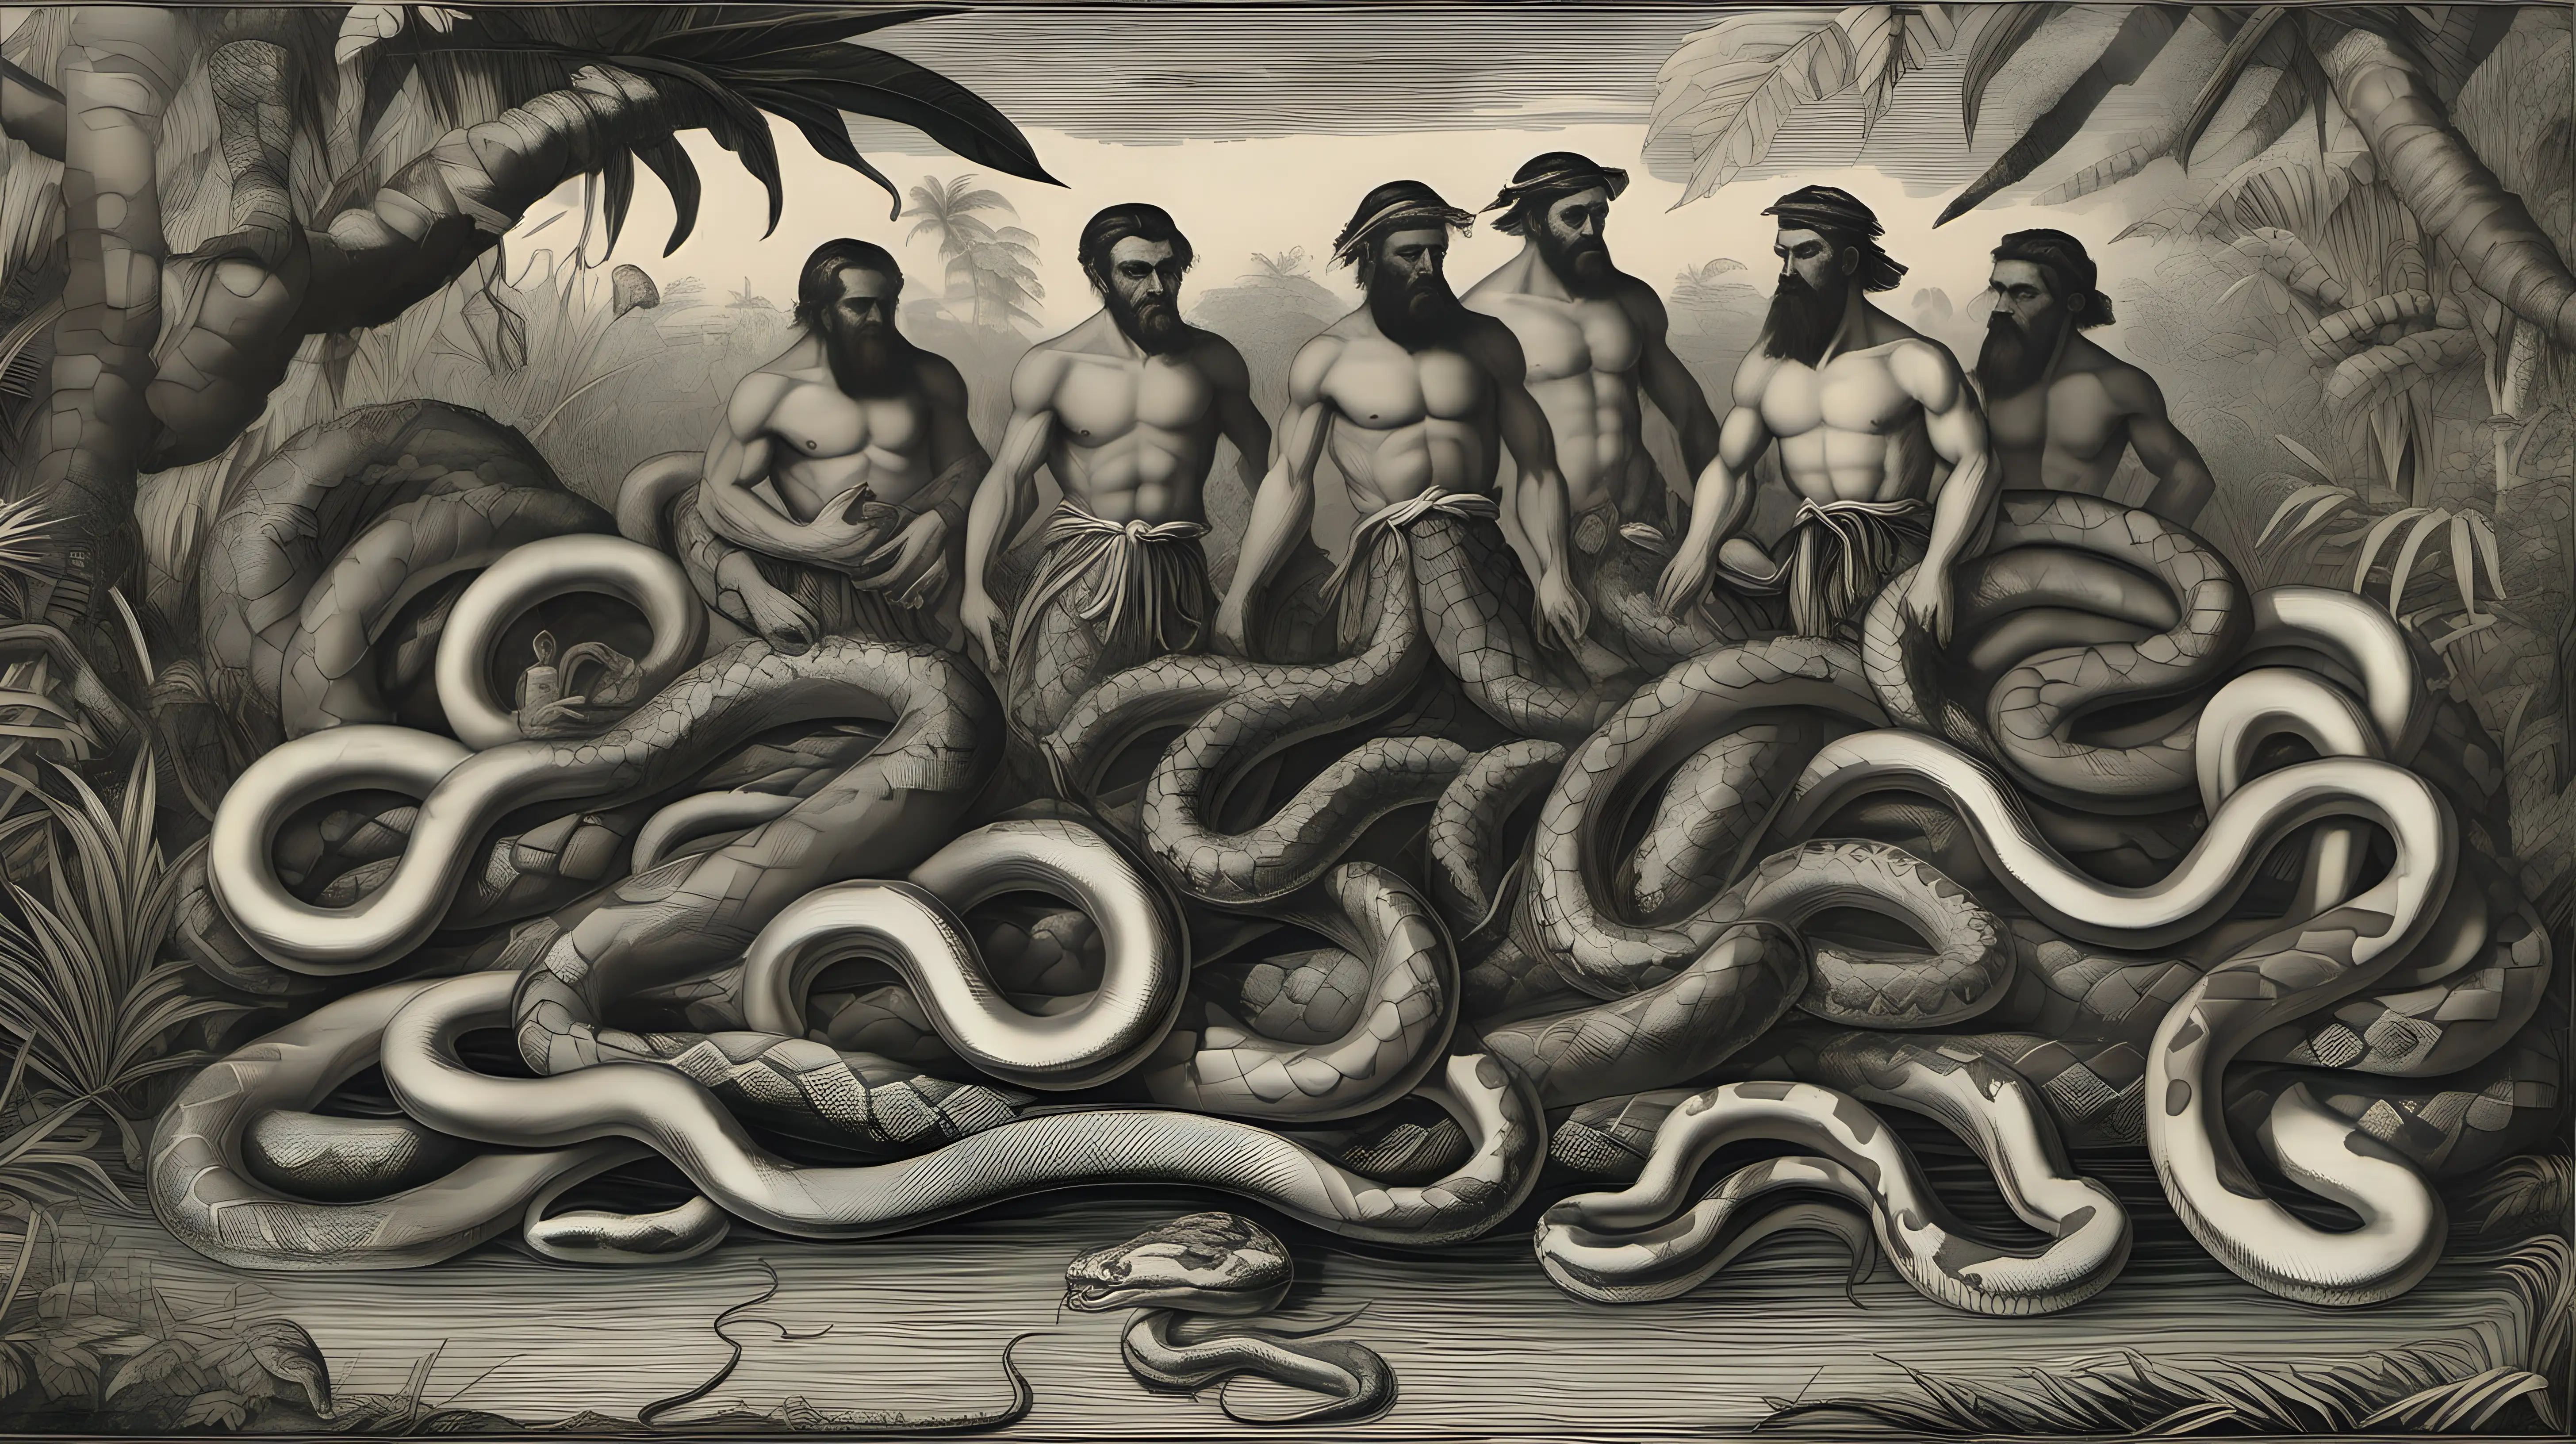 and beards braided with snakes, lay face up in the Amazon river covered in water. The men's and the snakes bodies are merging into a mass limbs, hair, and snakes, undifferentiated. It is raining and the scene is very humid, they're surrounded by wet jungle. In the style of theodore de bry, without any text captions. Duotone.